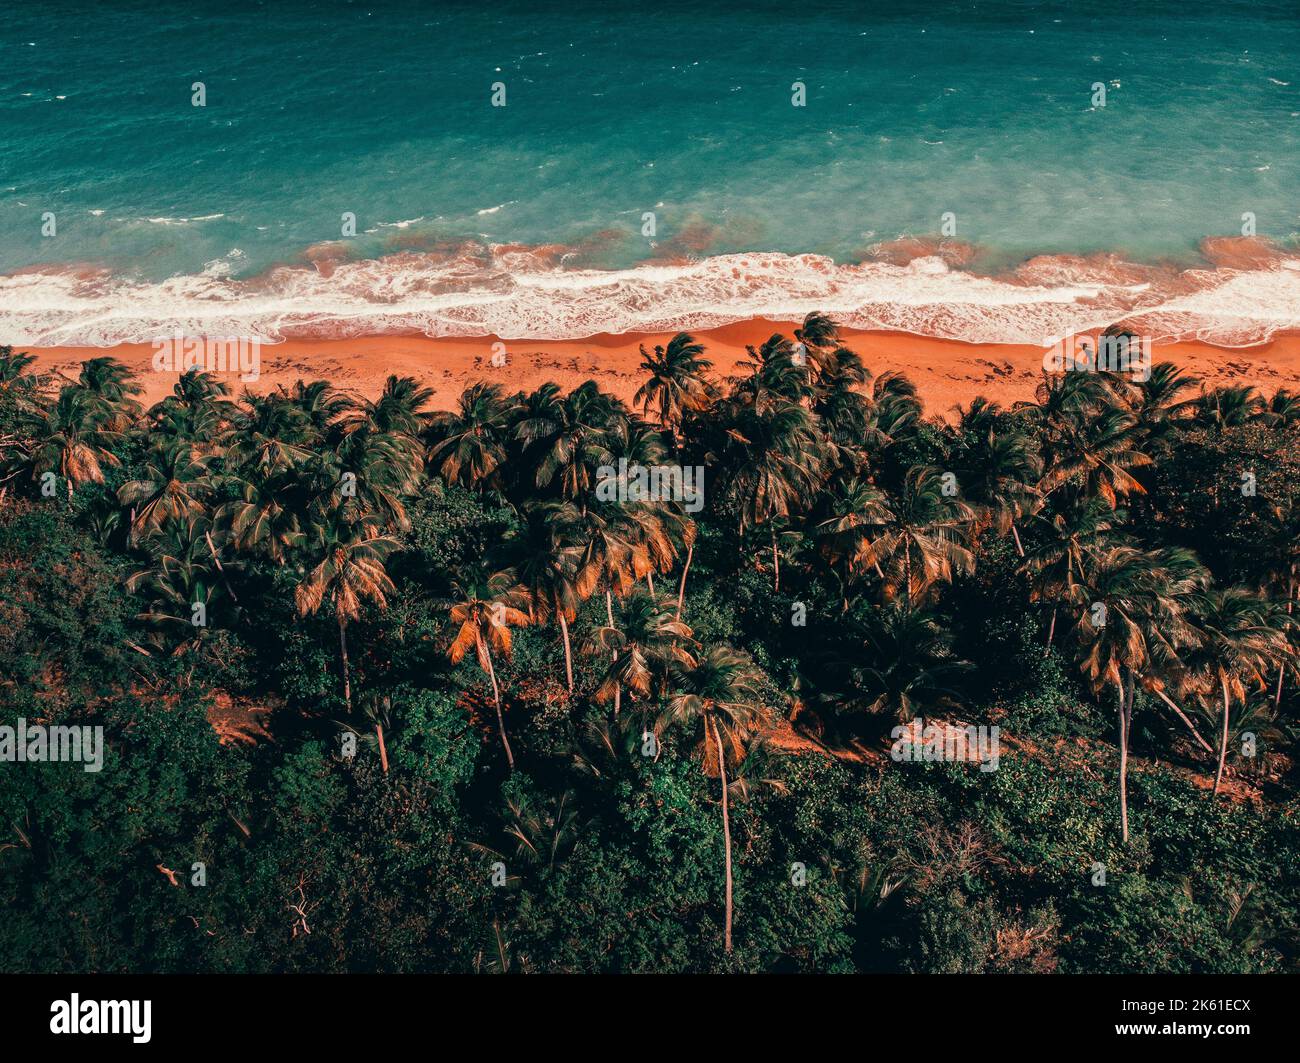 Layers of palms, sand and ocean from a beach in Puerto rico Stock Photo